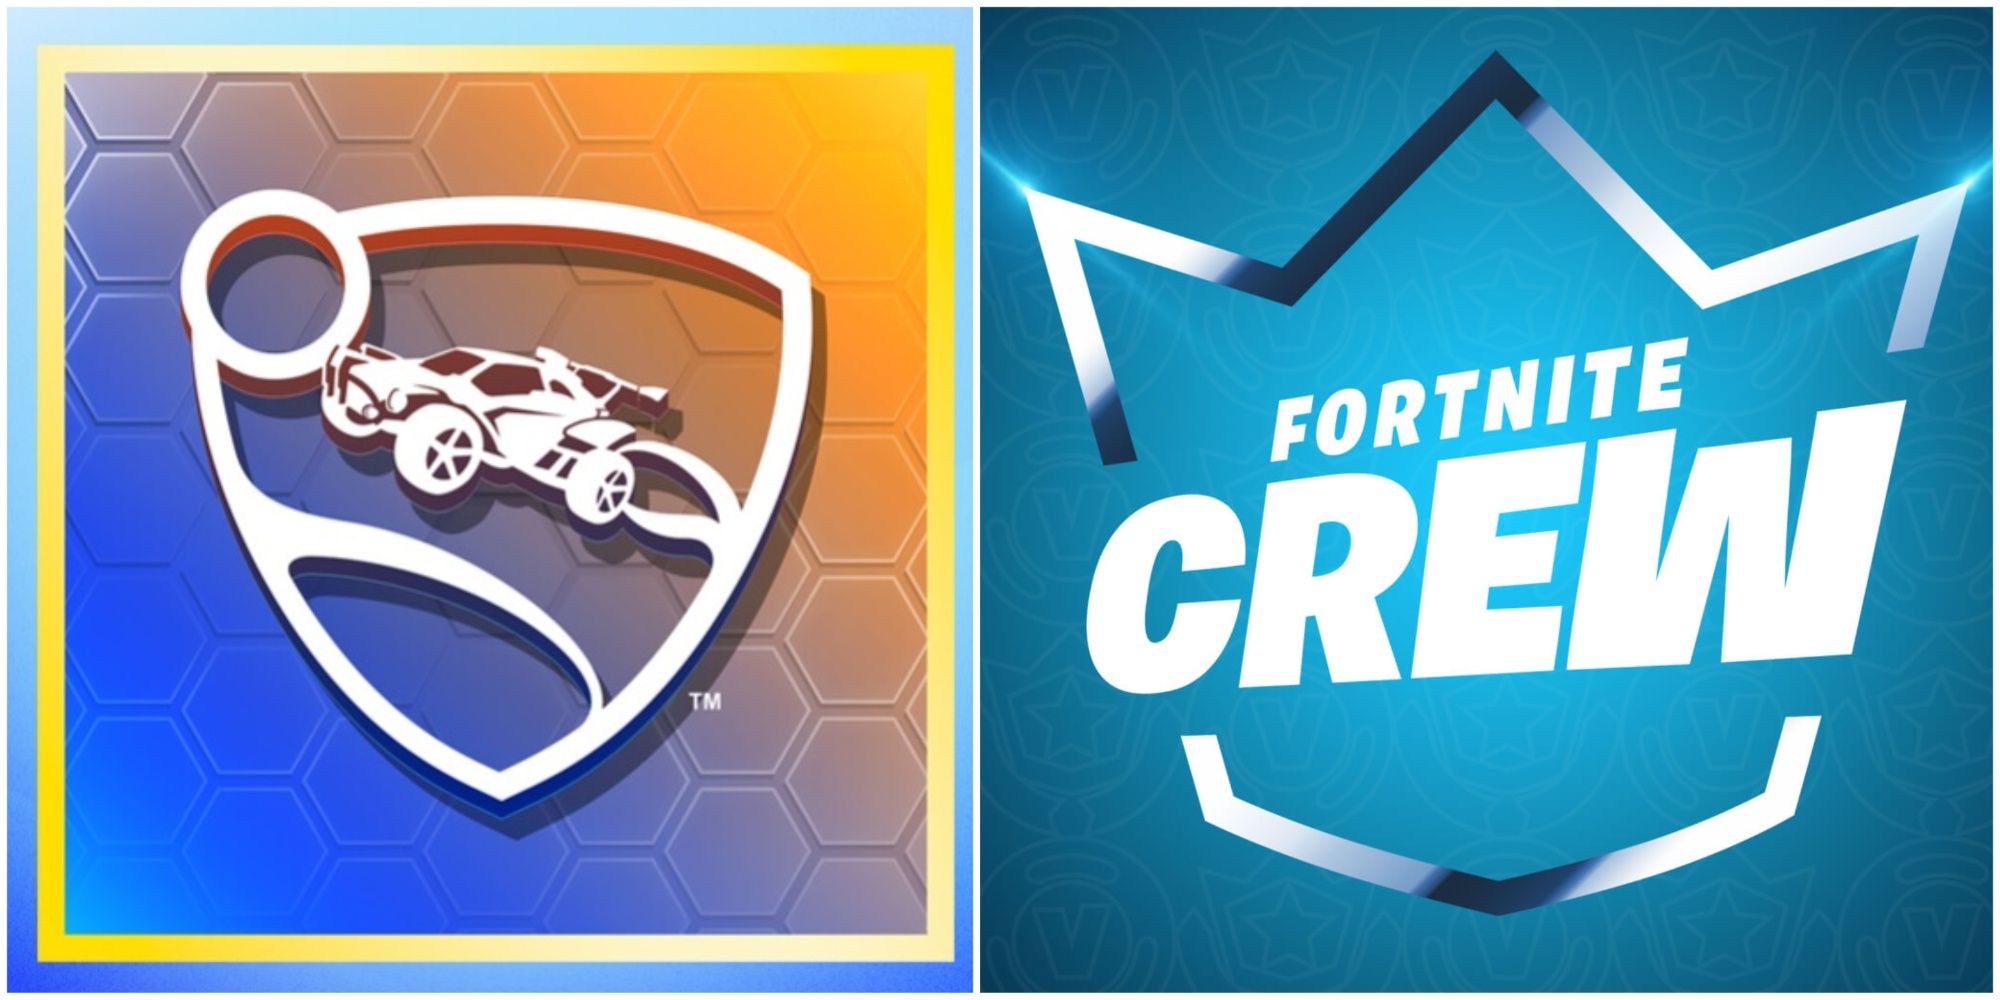 How To Get The Rocket Pass For Free With Fortnite Crew